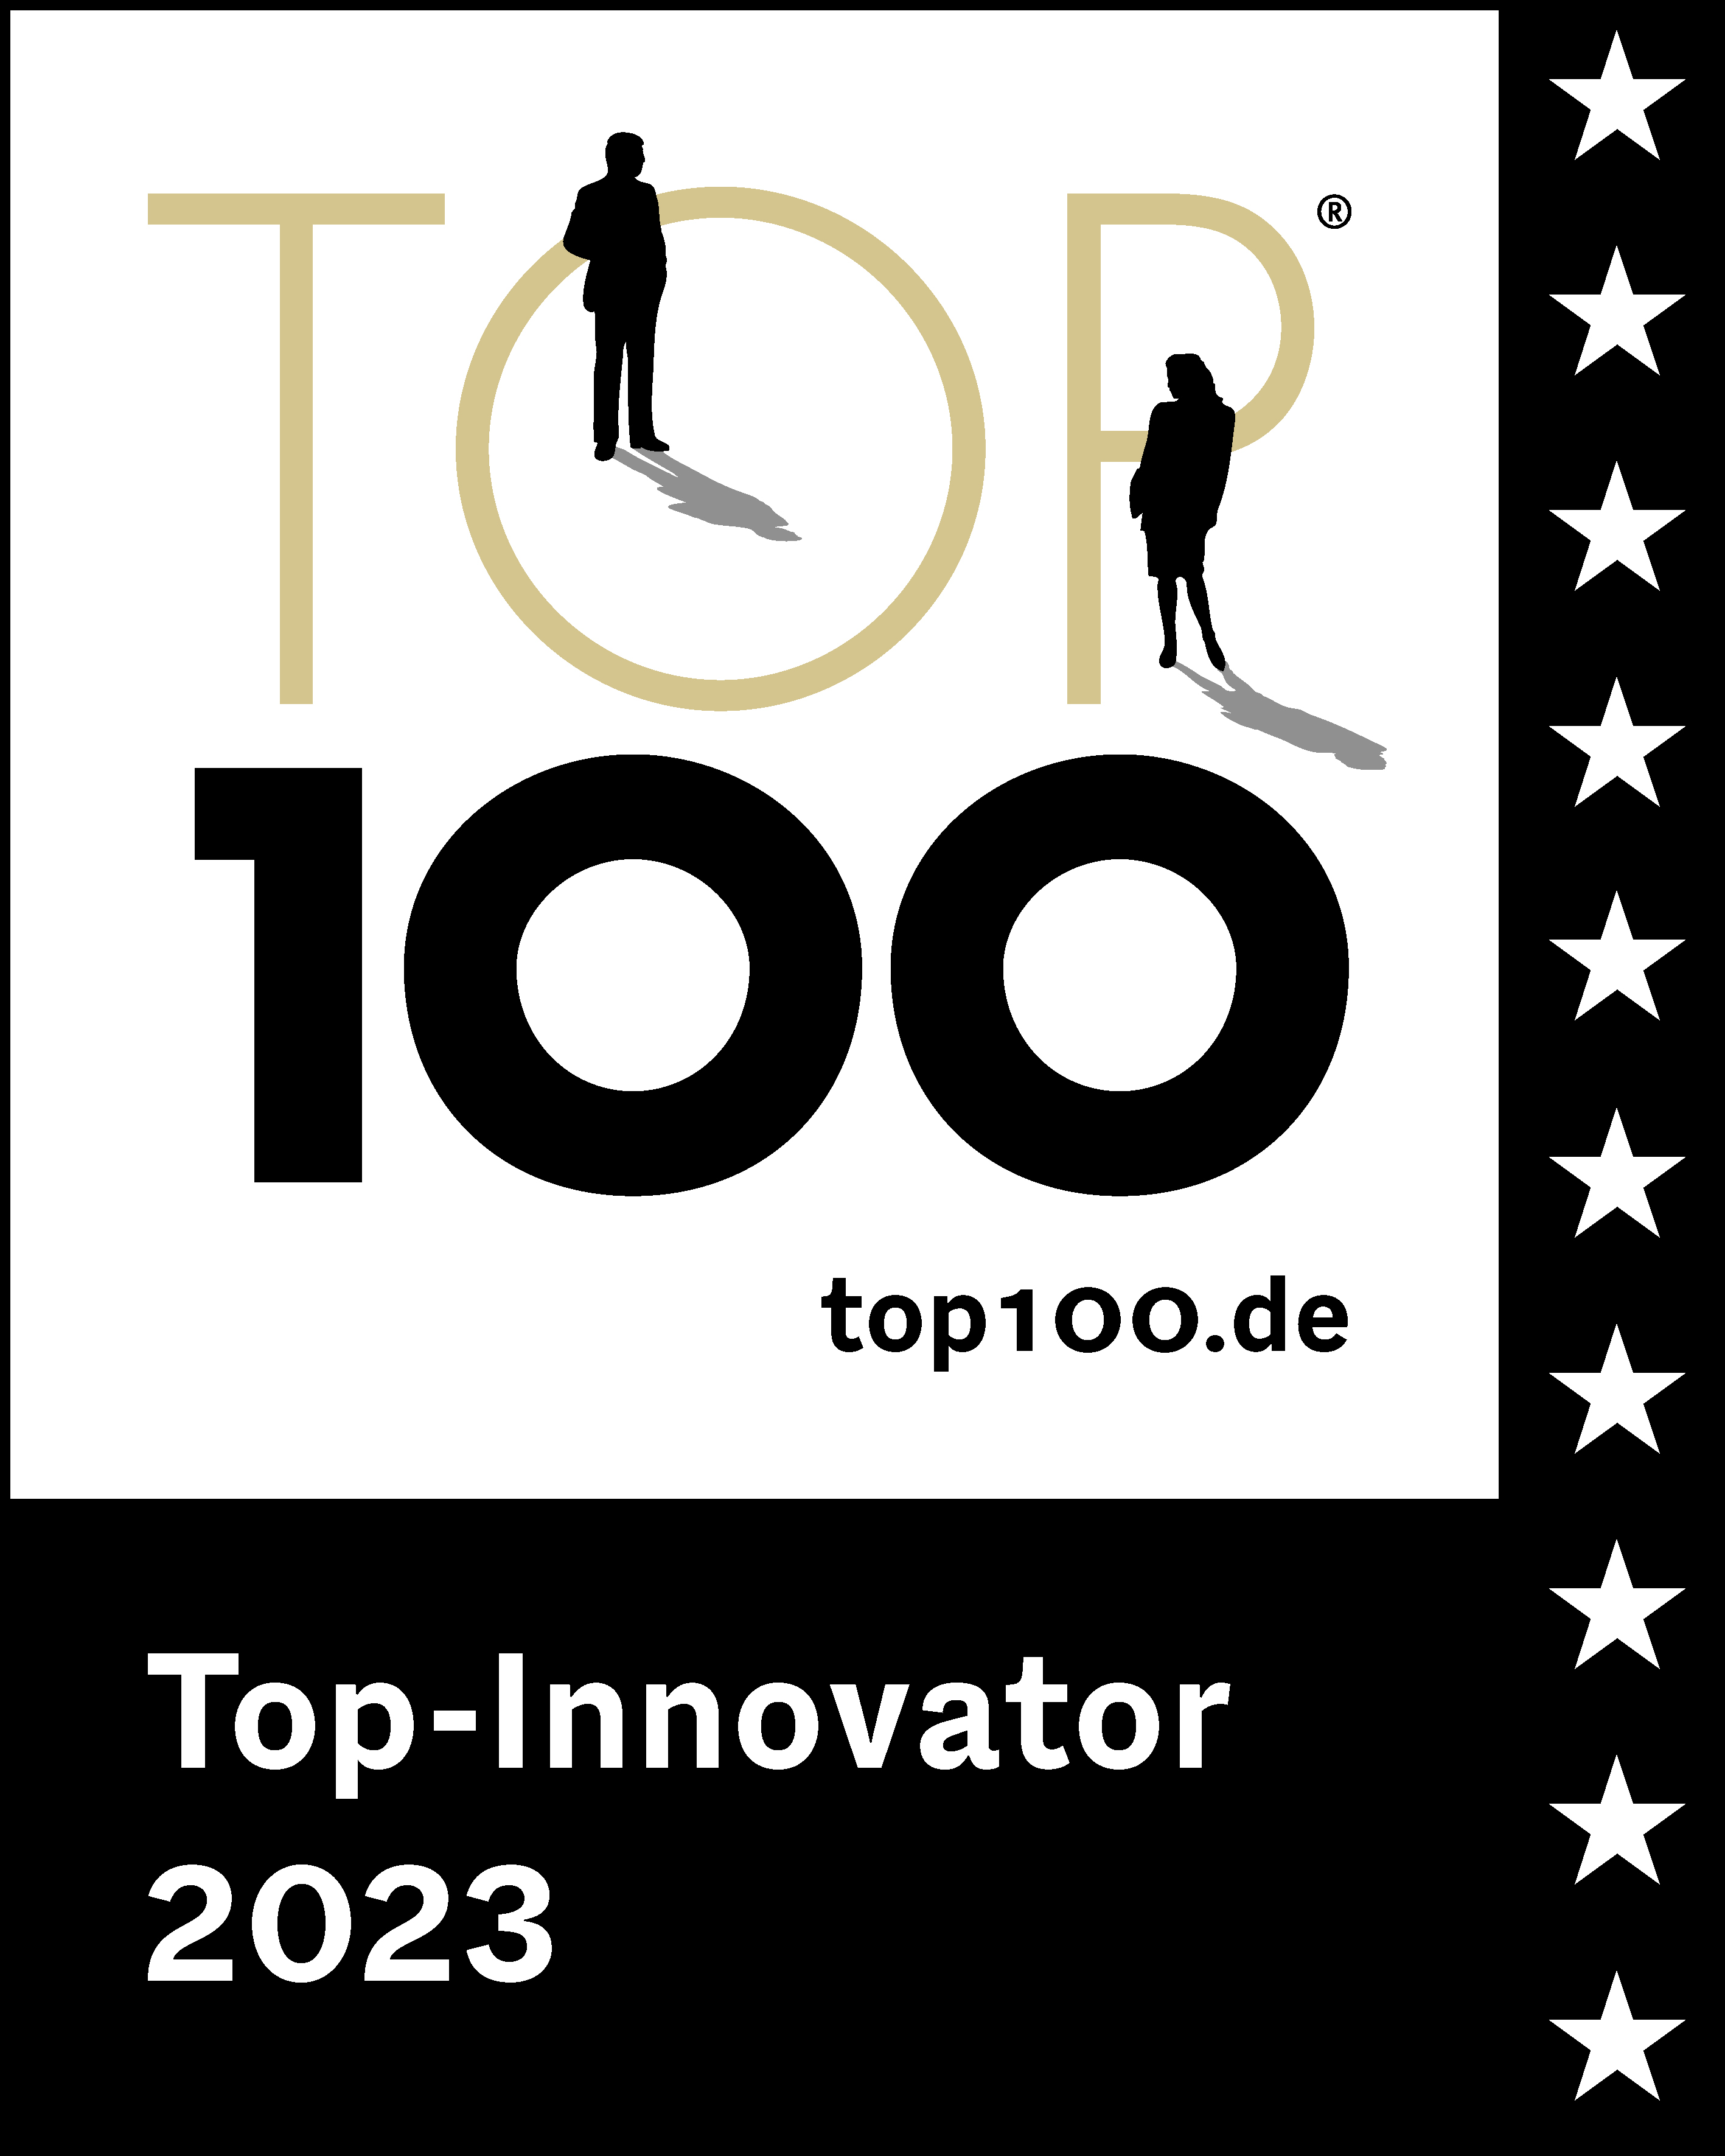 [Translate to Englisch:] Top-Innovator 2023